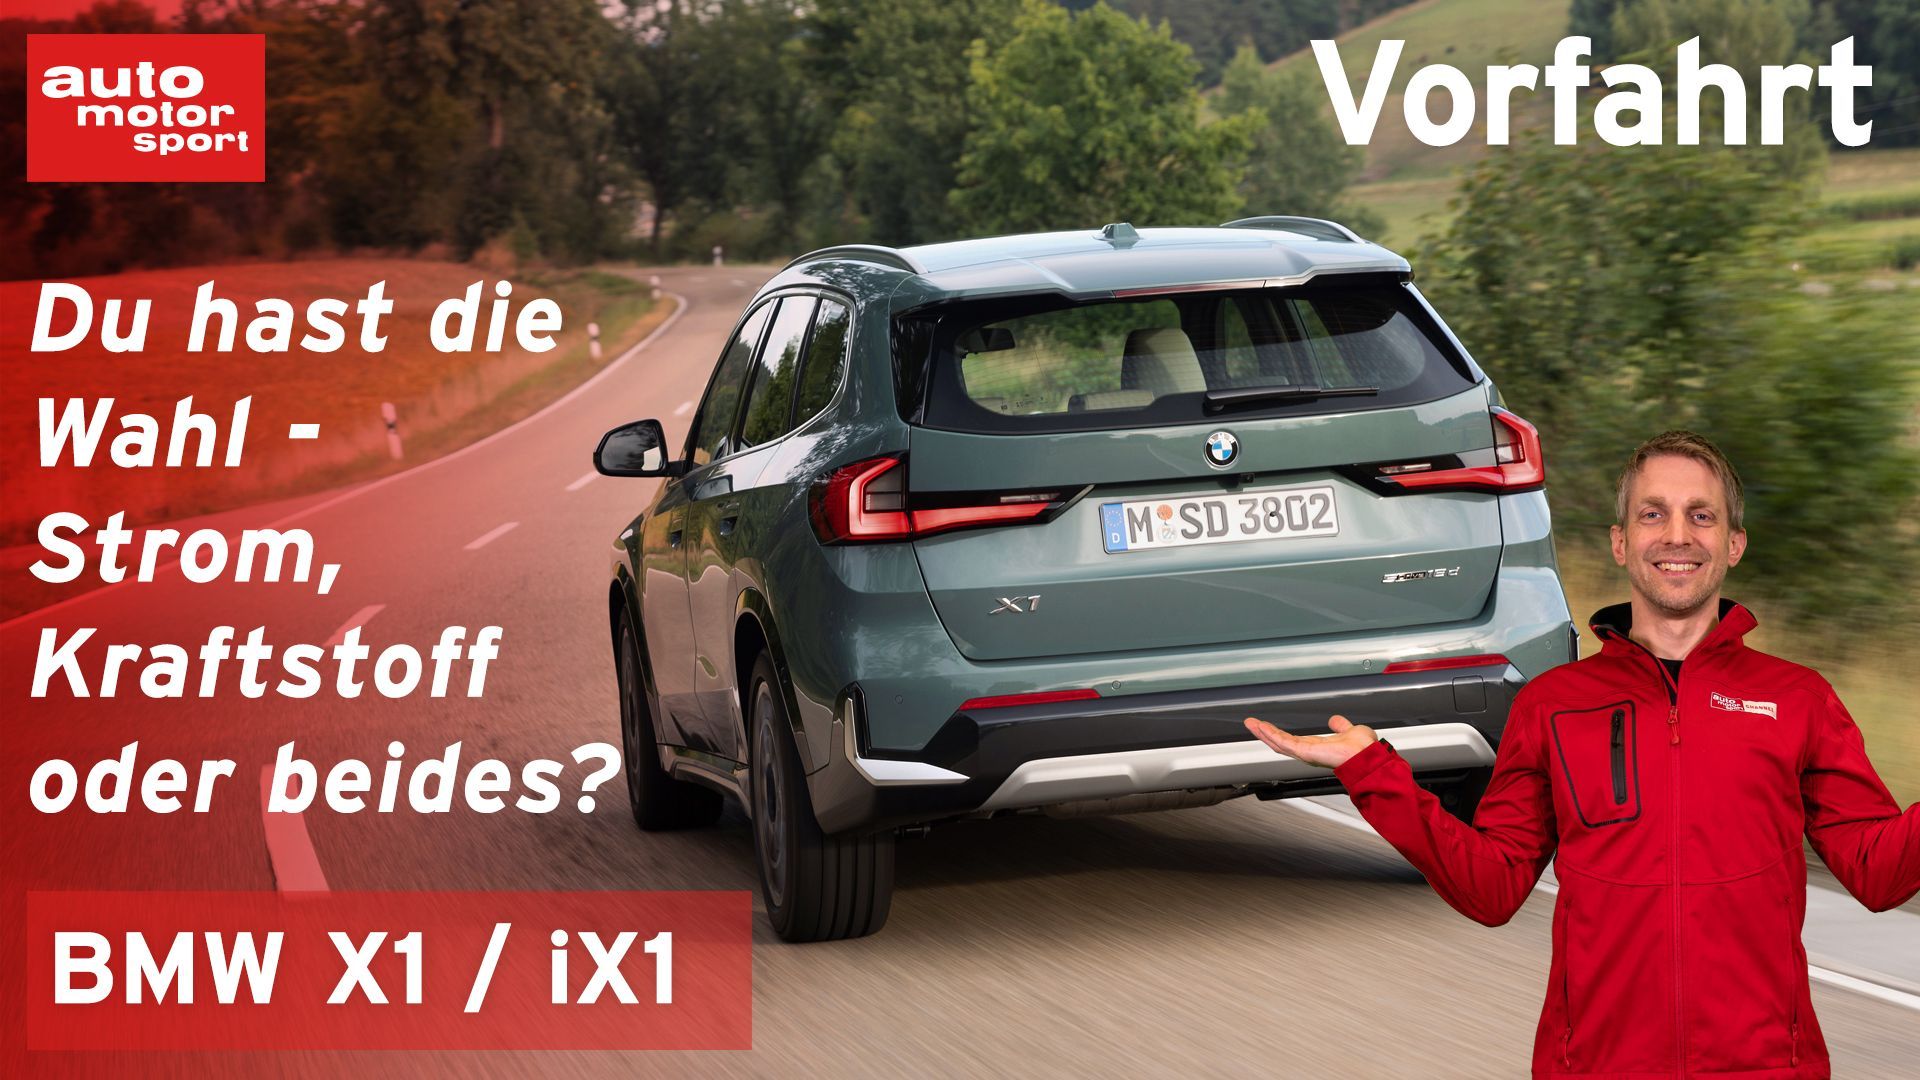 BMW X1 (2022): Spoilt for choice - which powertrain will it be?